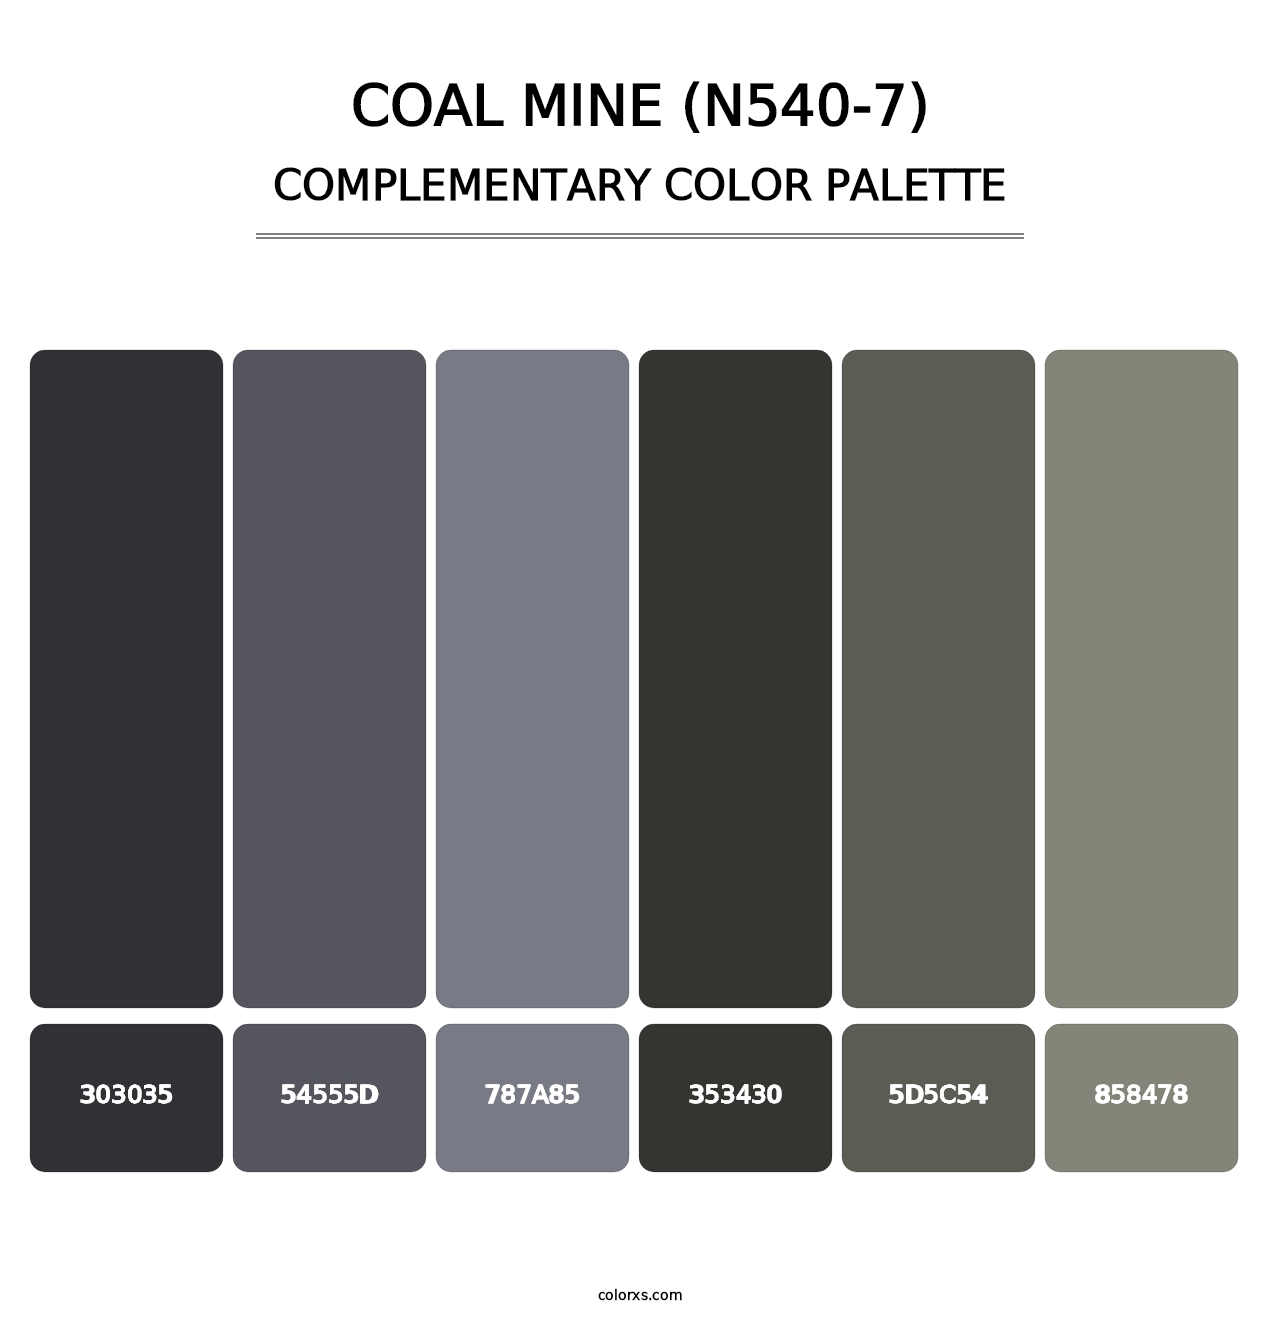 Coal Mine (N540-7) - Complementary Color Palette